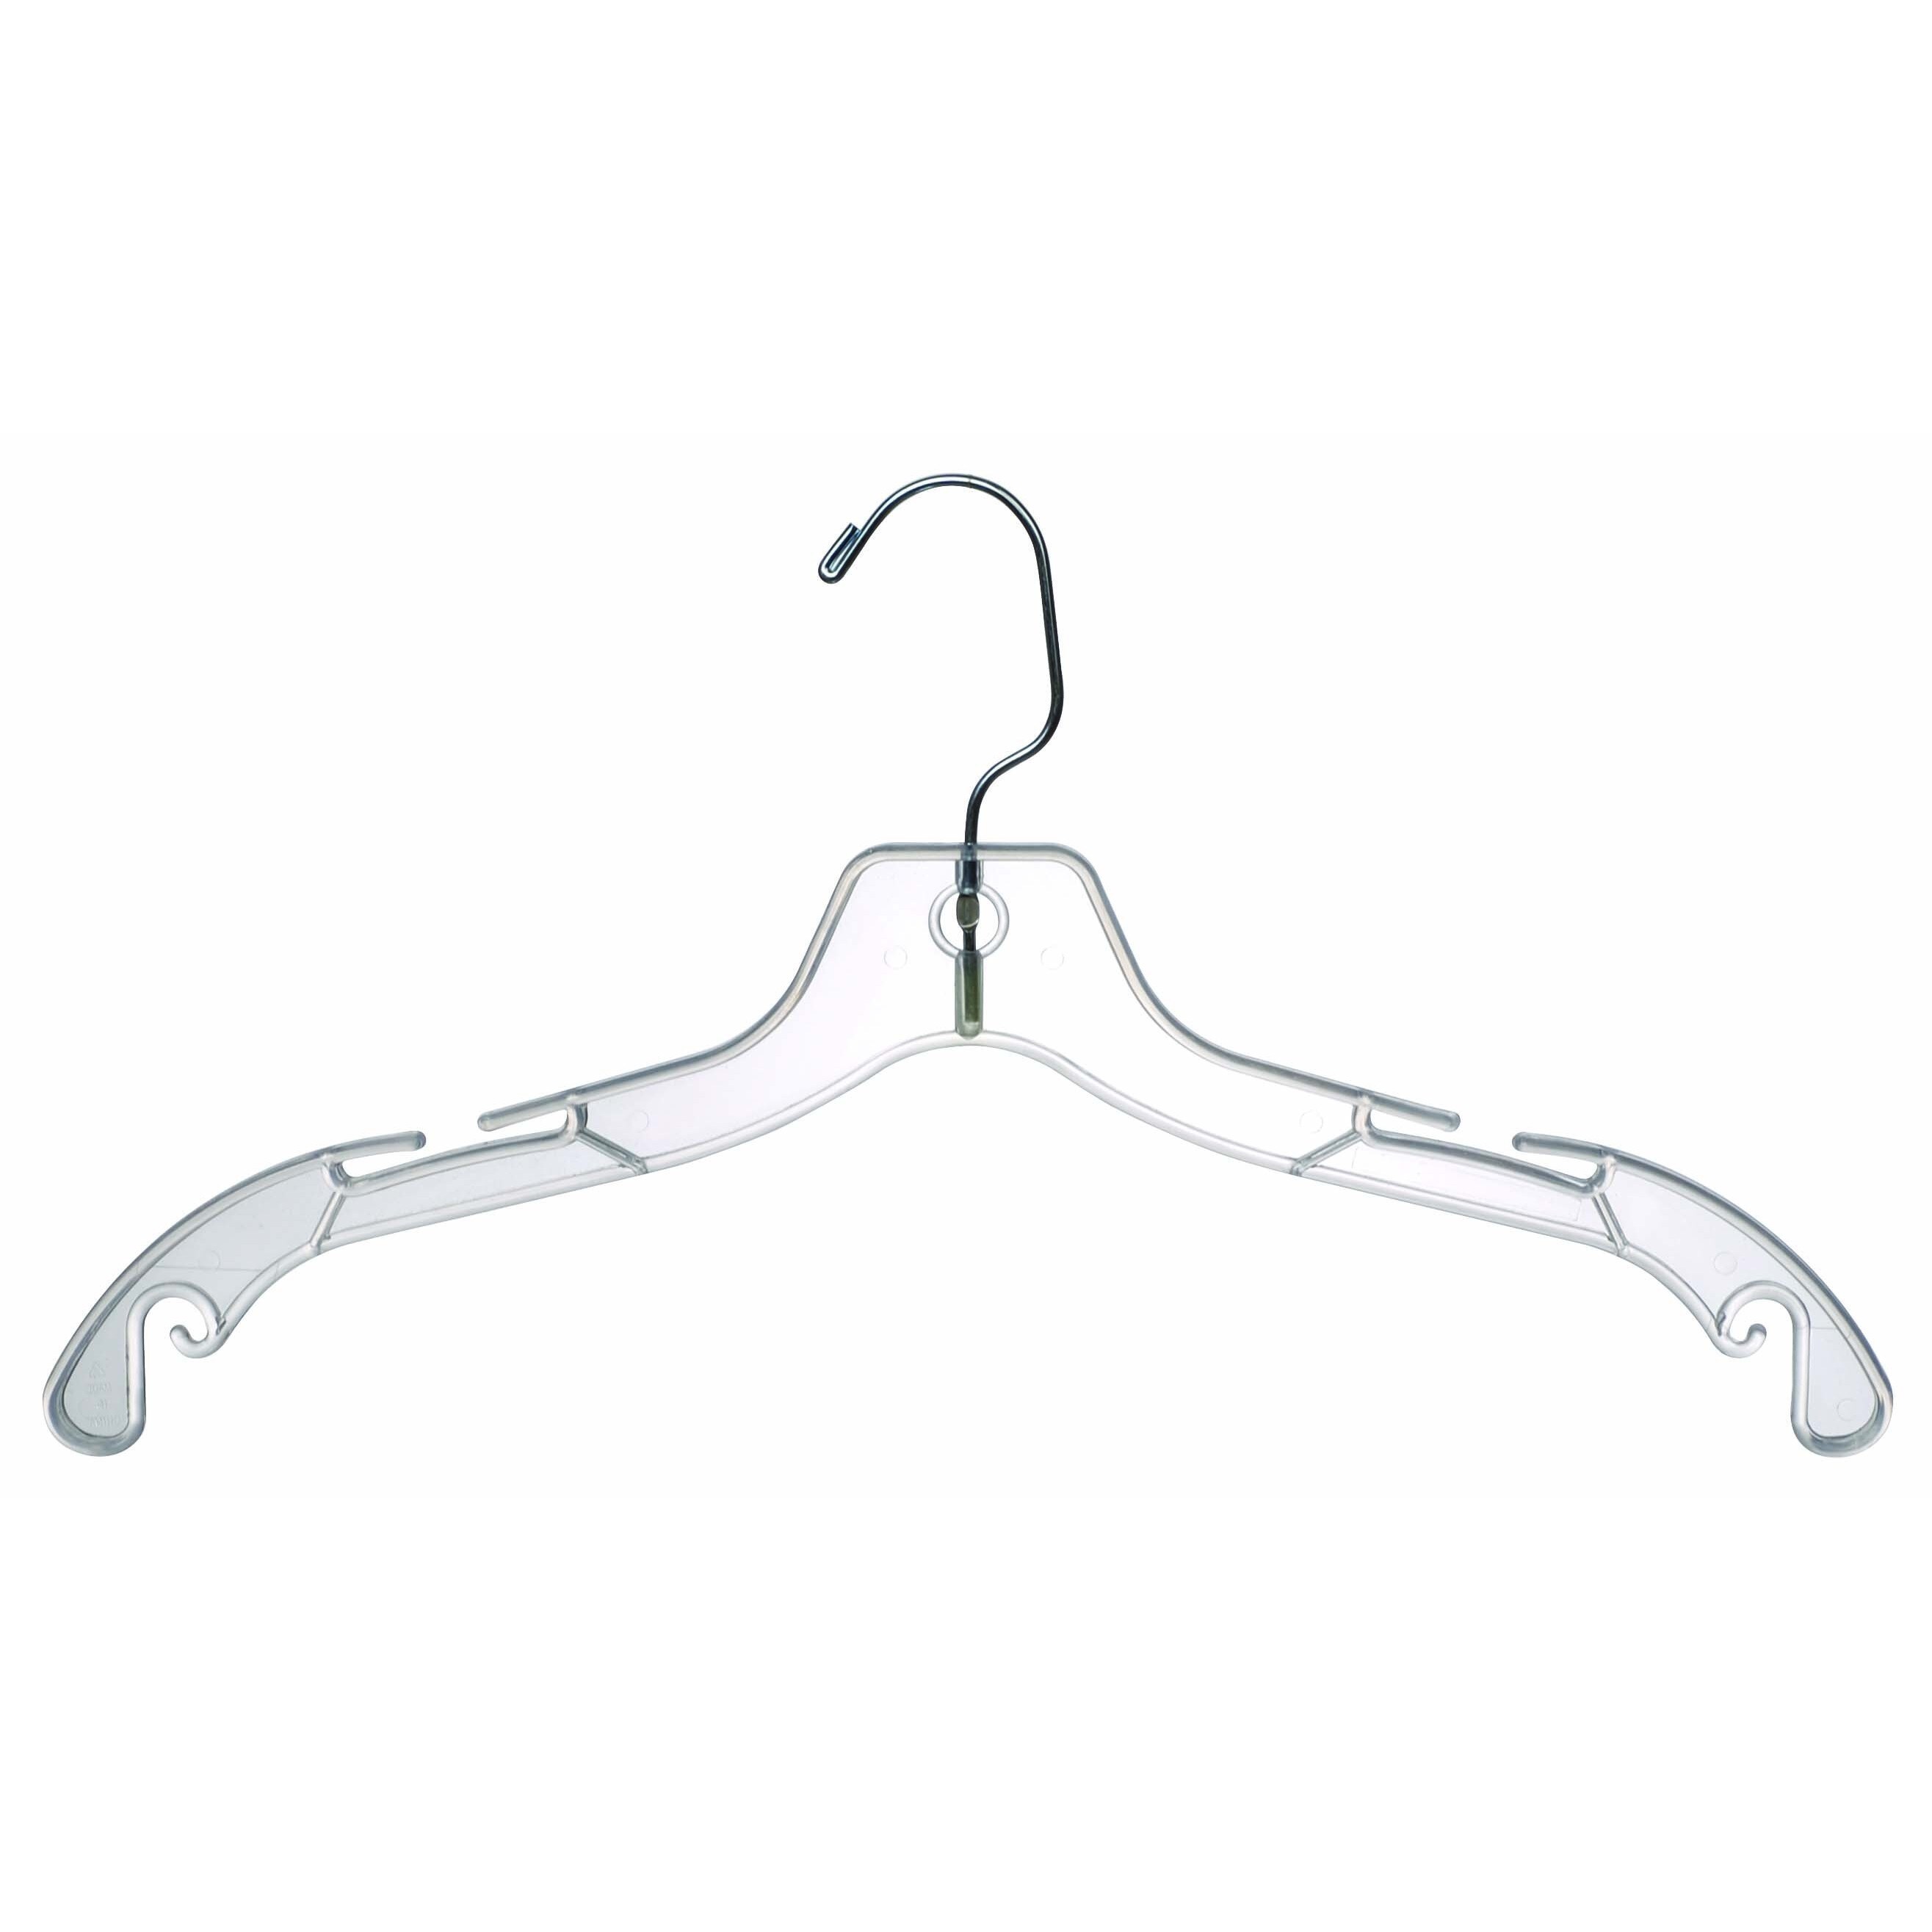 https://ak1.ostkcdn.com/images/products/9518122/Classic-Plastic-Hanger-with-Notches-and-Swivel-Hook-49b56773-ee4b-4fcb-86c3-d6e85edc91dd.jpg